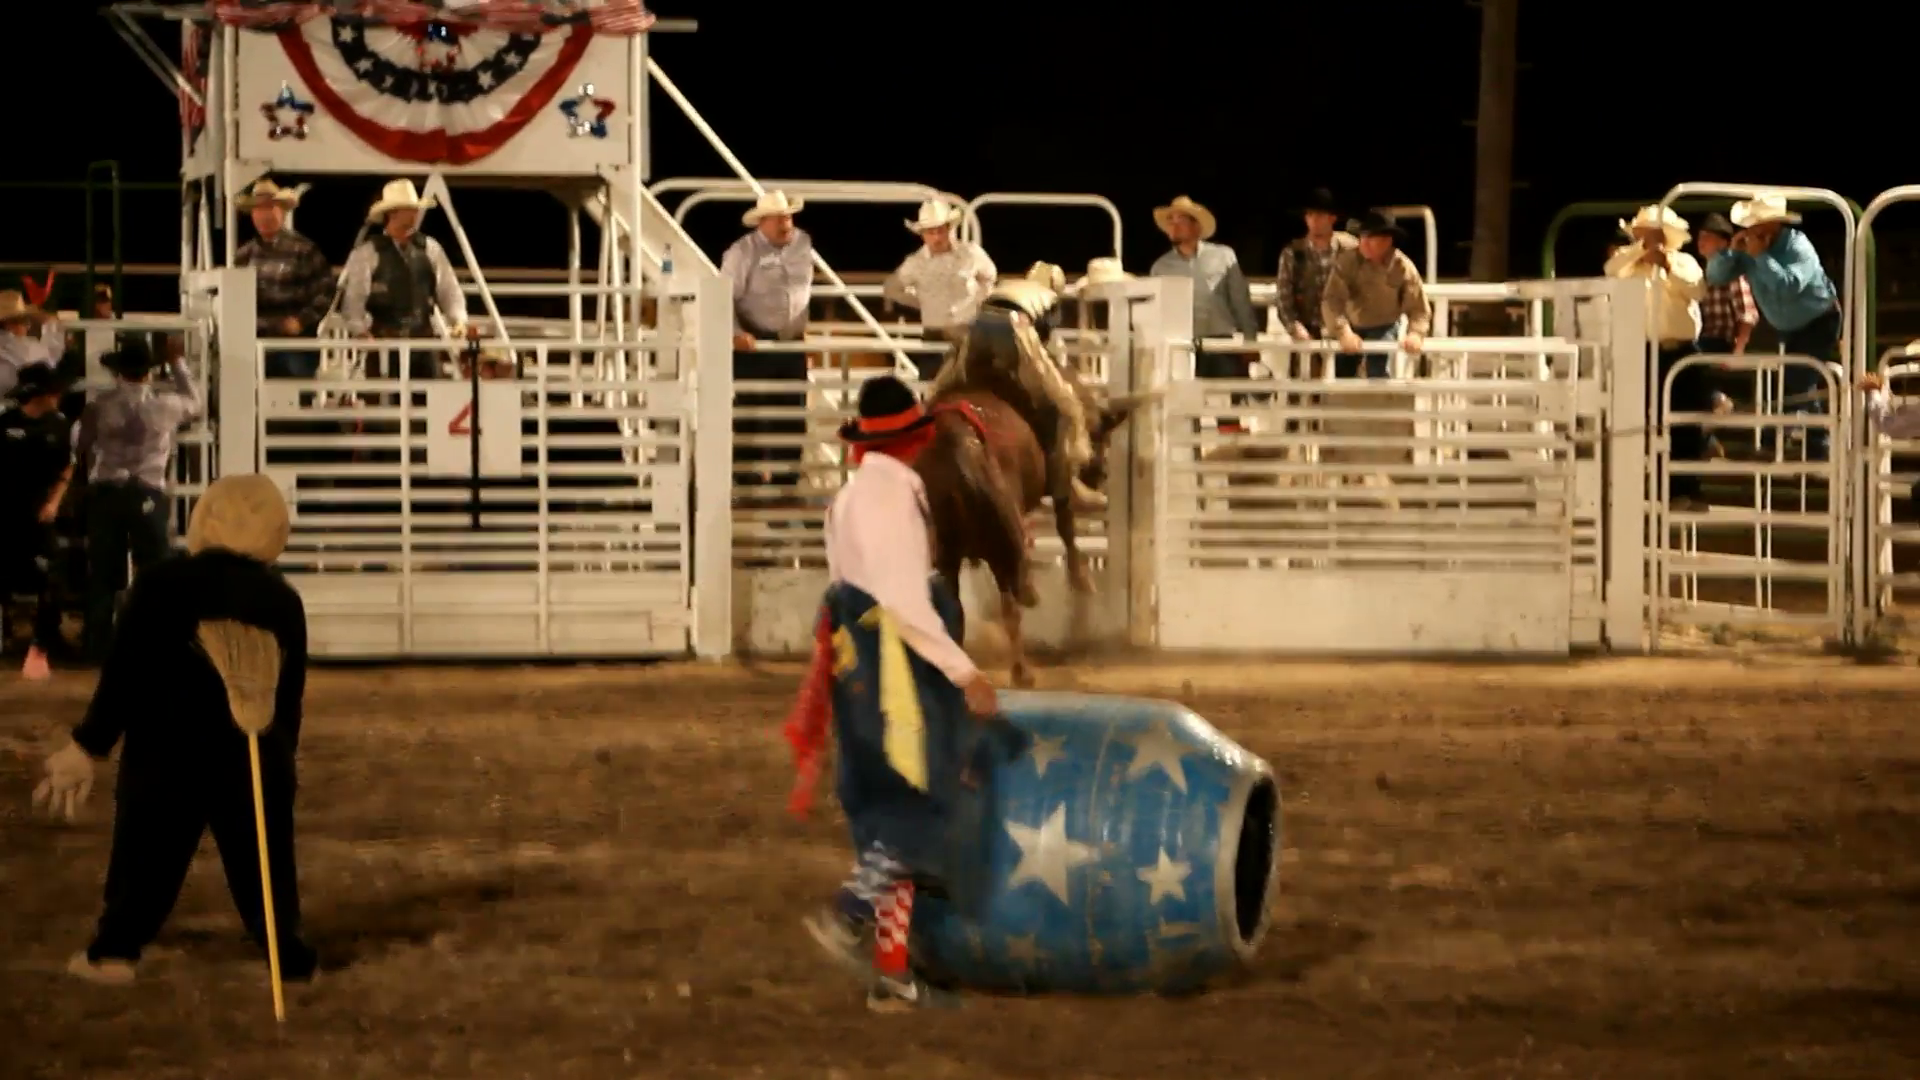 Rodeo calf roping with a youn